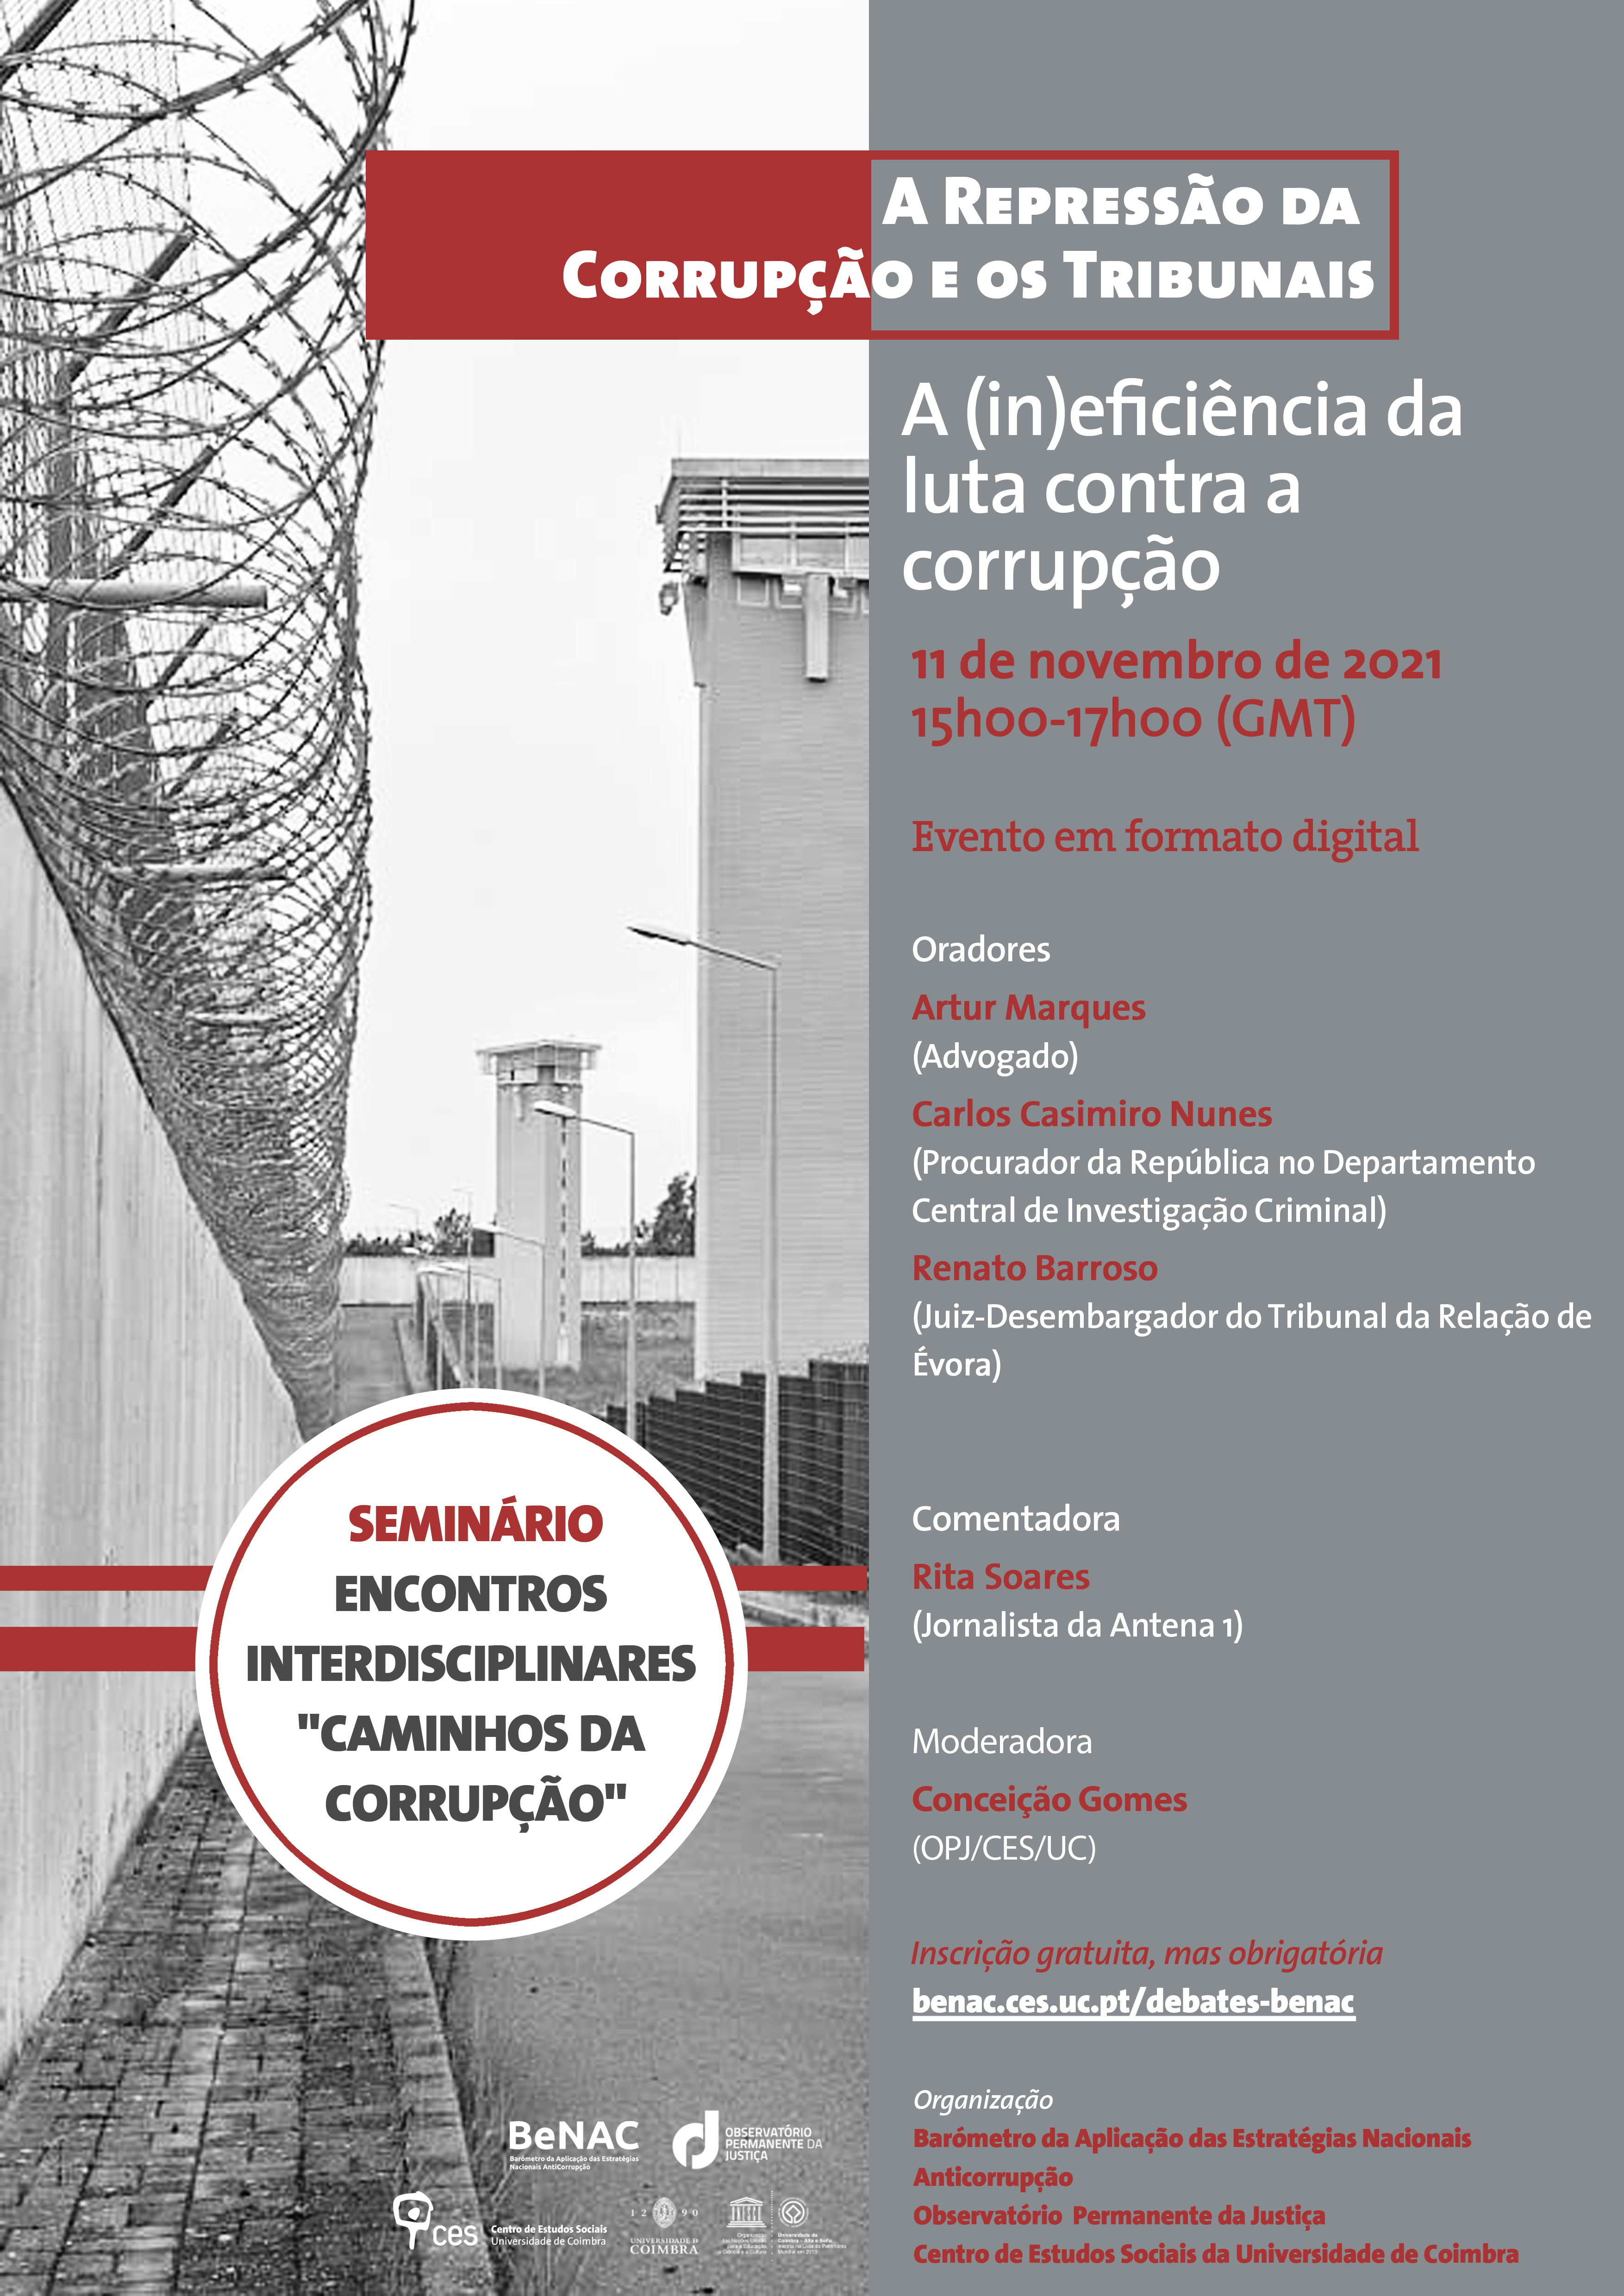 Corruption Suppression and the Courts: The (in)efficiency of the fight against corruption<span id="edit_35587"><script>$(function() { $('#edit_35587').load( "/myces/user/editobj.php?tipo=evento&id=35587" ); });</script></span>